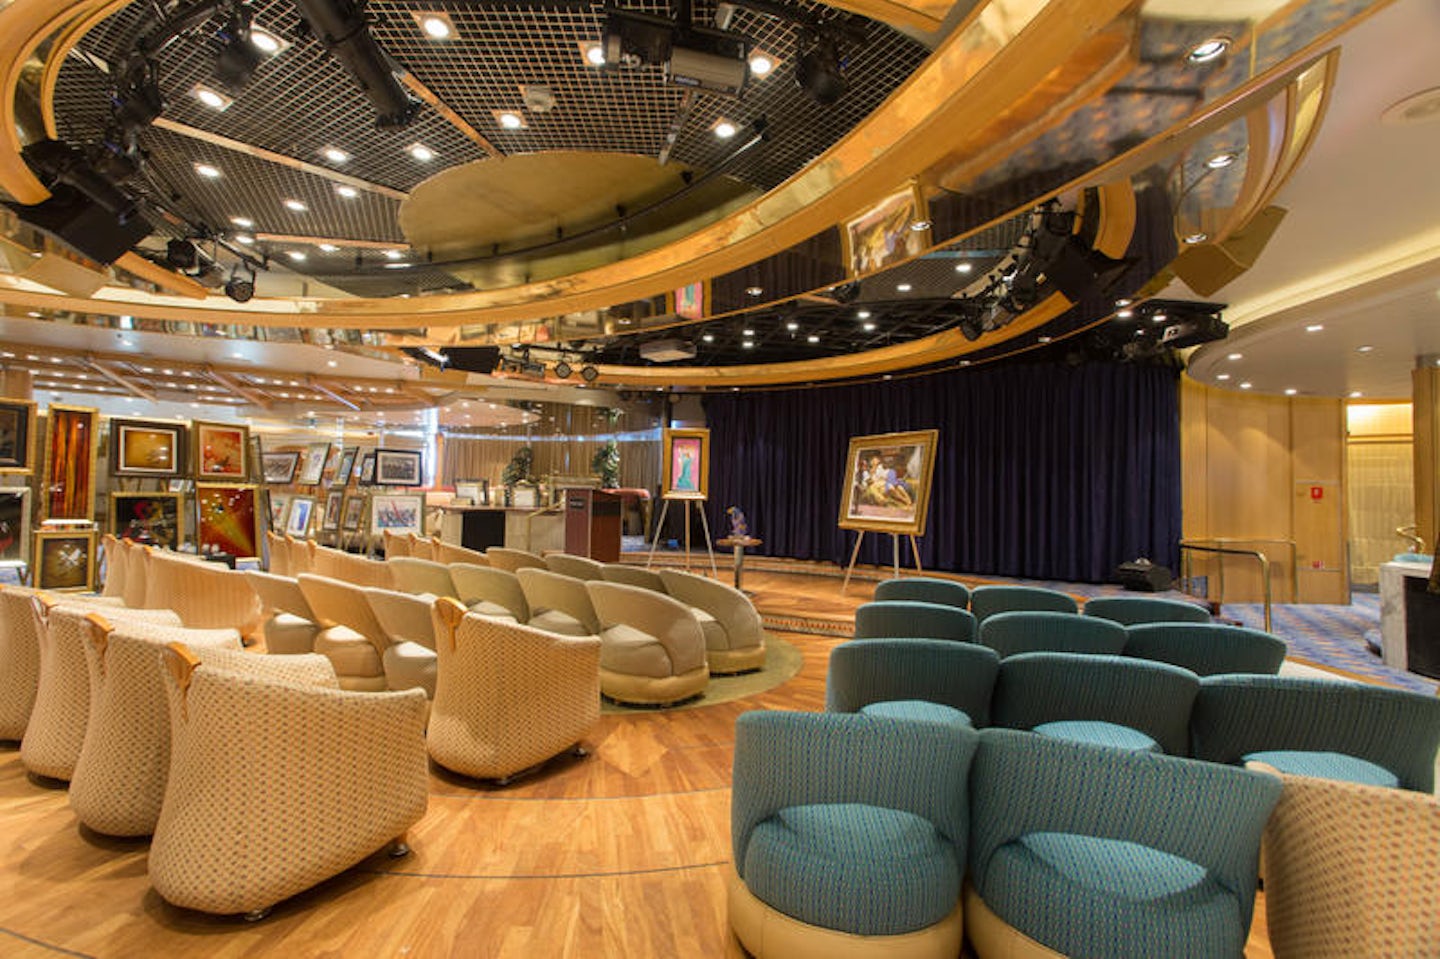 Art Gallery on Enchantment of the Seas